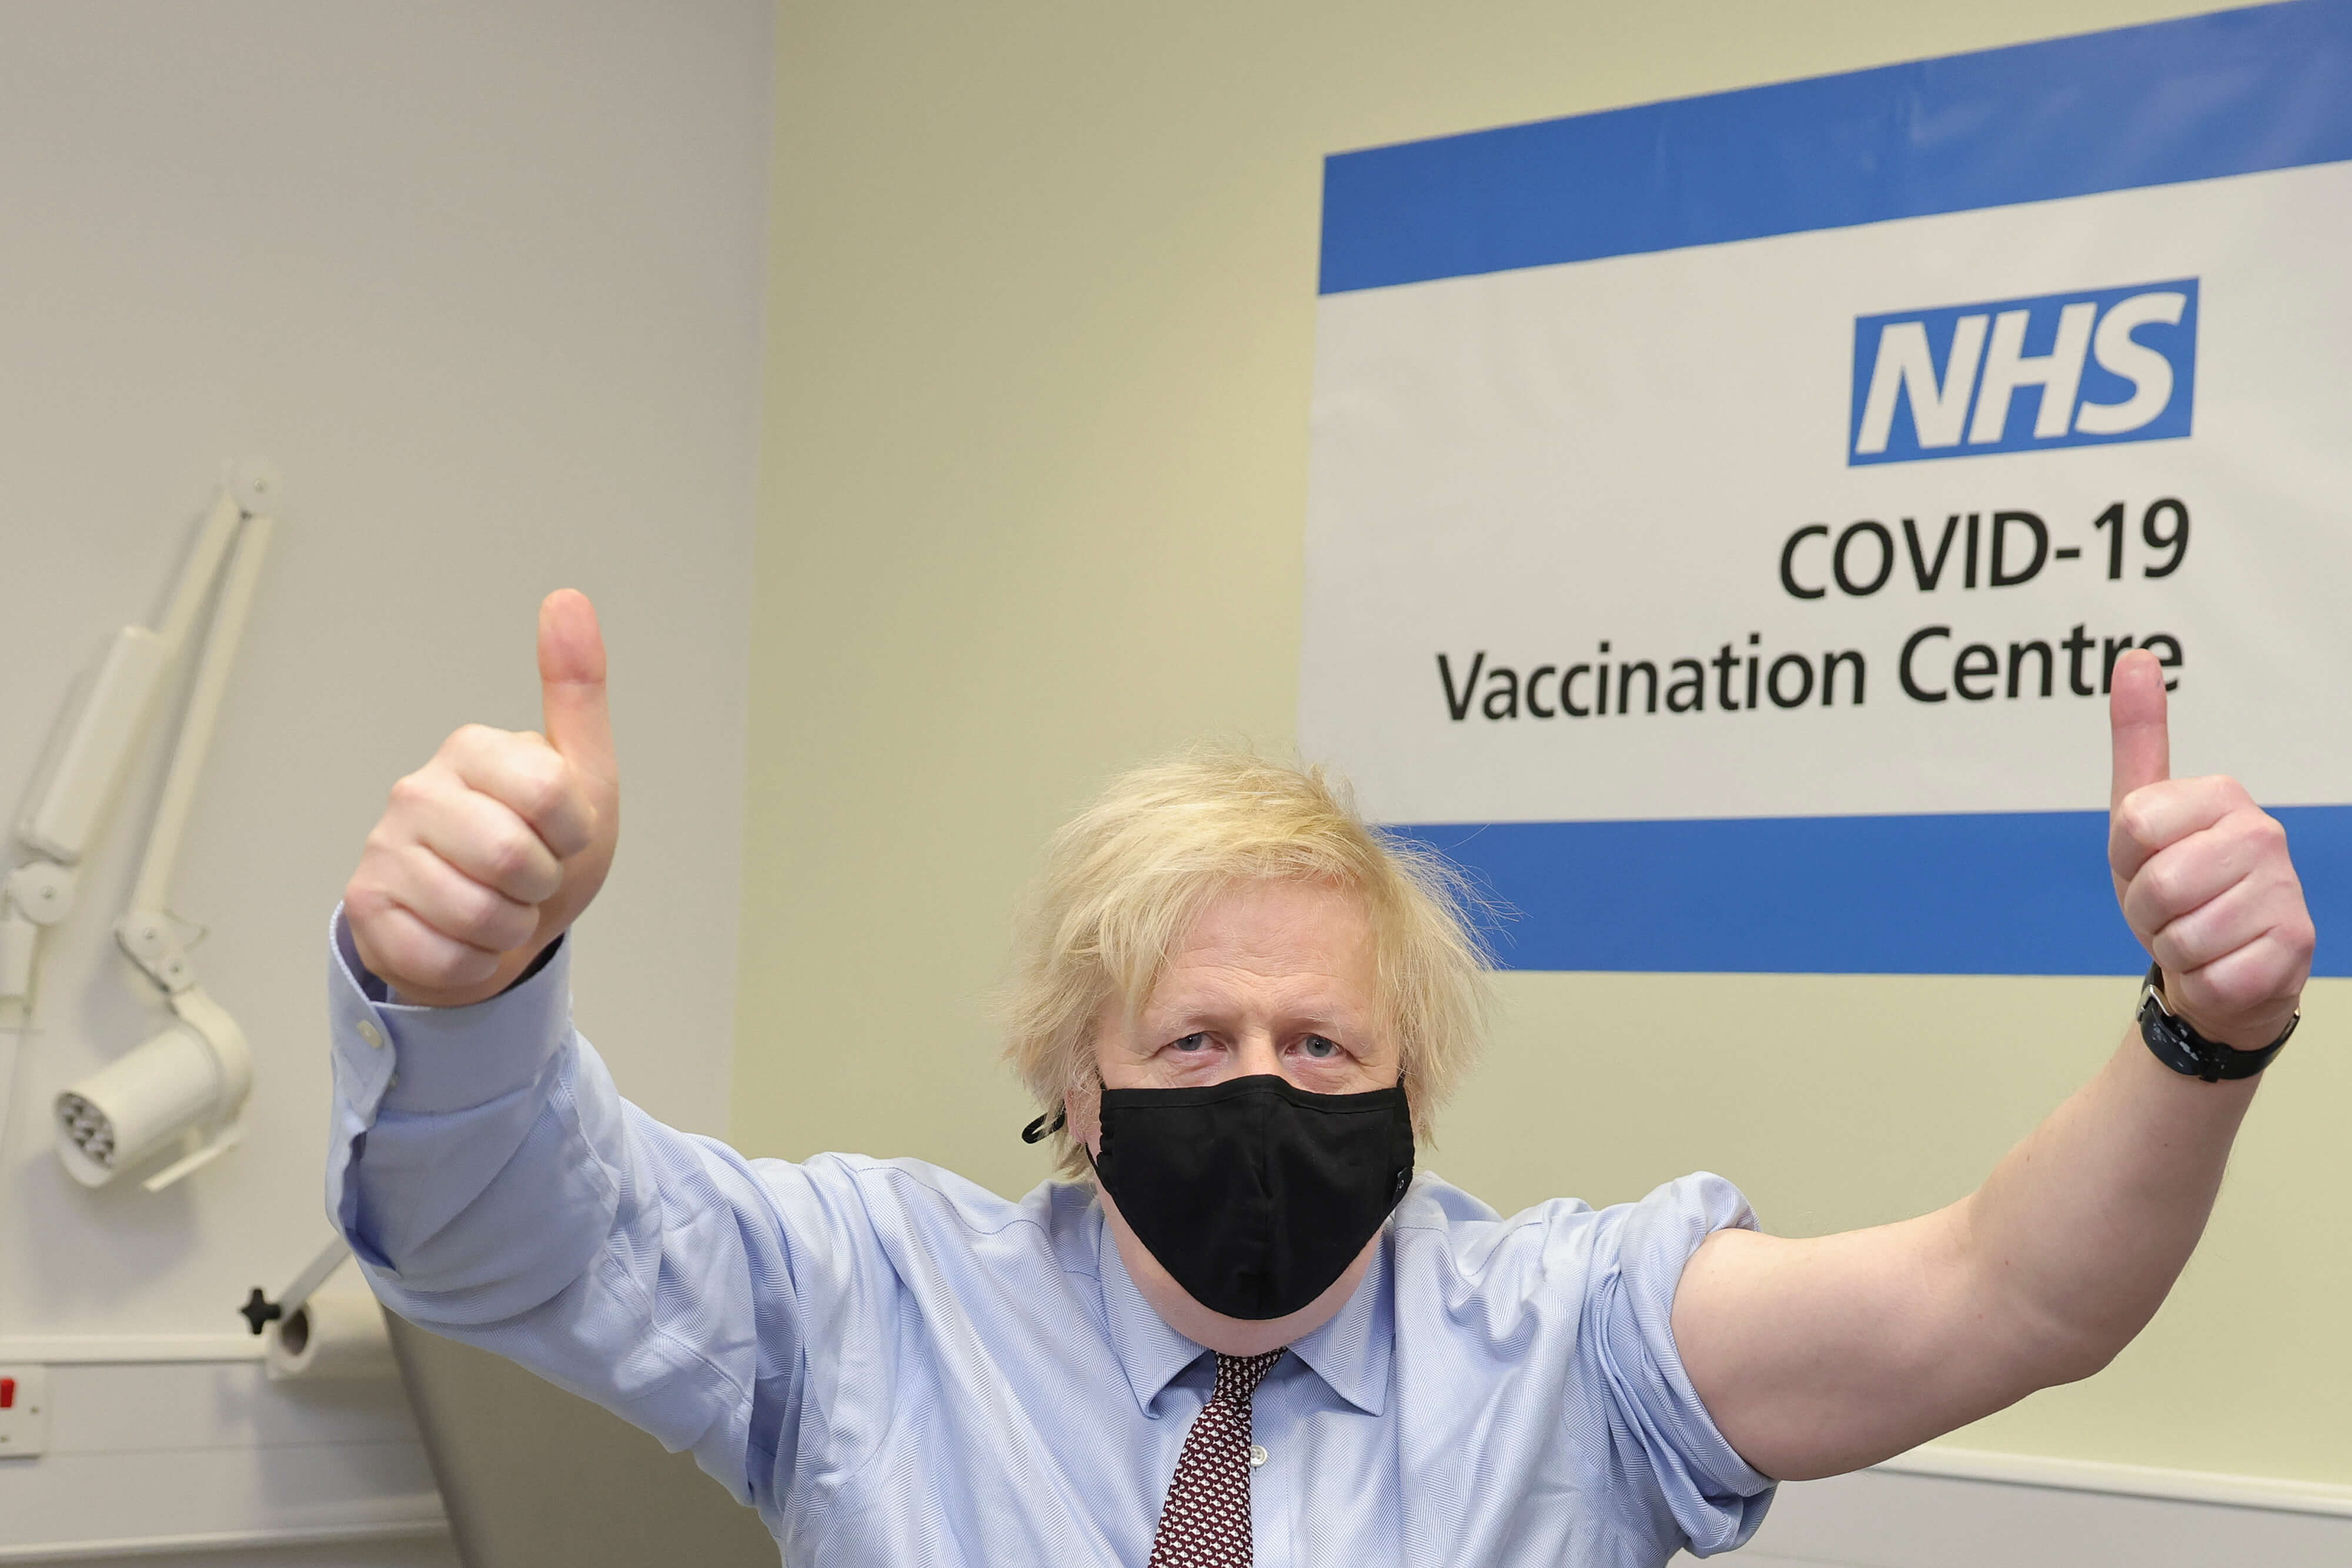 Thunder - The Prime Minister Boris Johnson is given the Oxford–AstraZeneca COVID-19 vaccine  at St Thomas' Hospital in central London in March 2021. Picture by Andrew Parsons - No 10 Downing Street